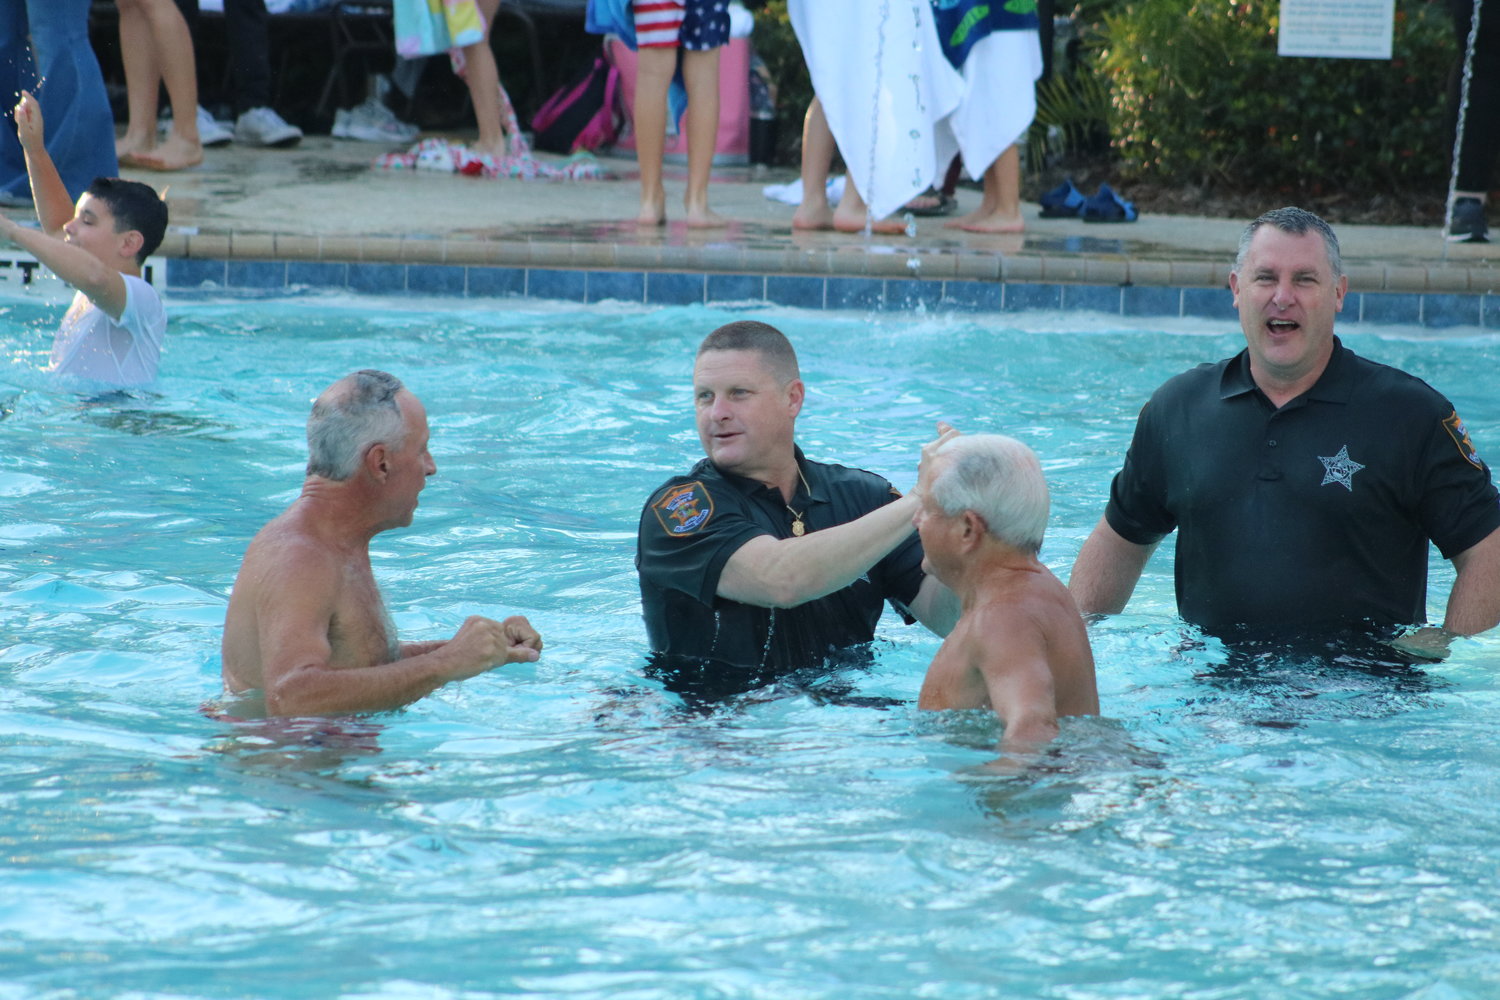 Even Sheriff Rob Hardwick took the plunge into the pool at Nocatee Splash Water Park.